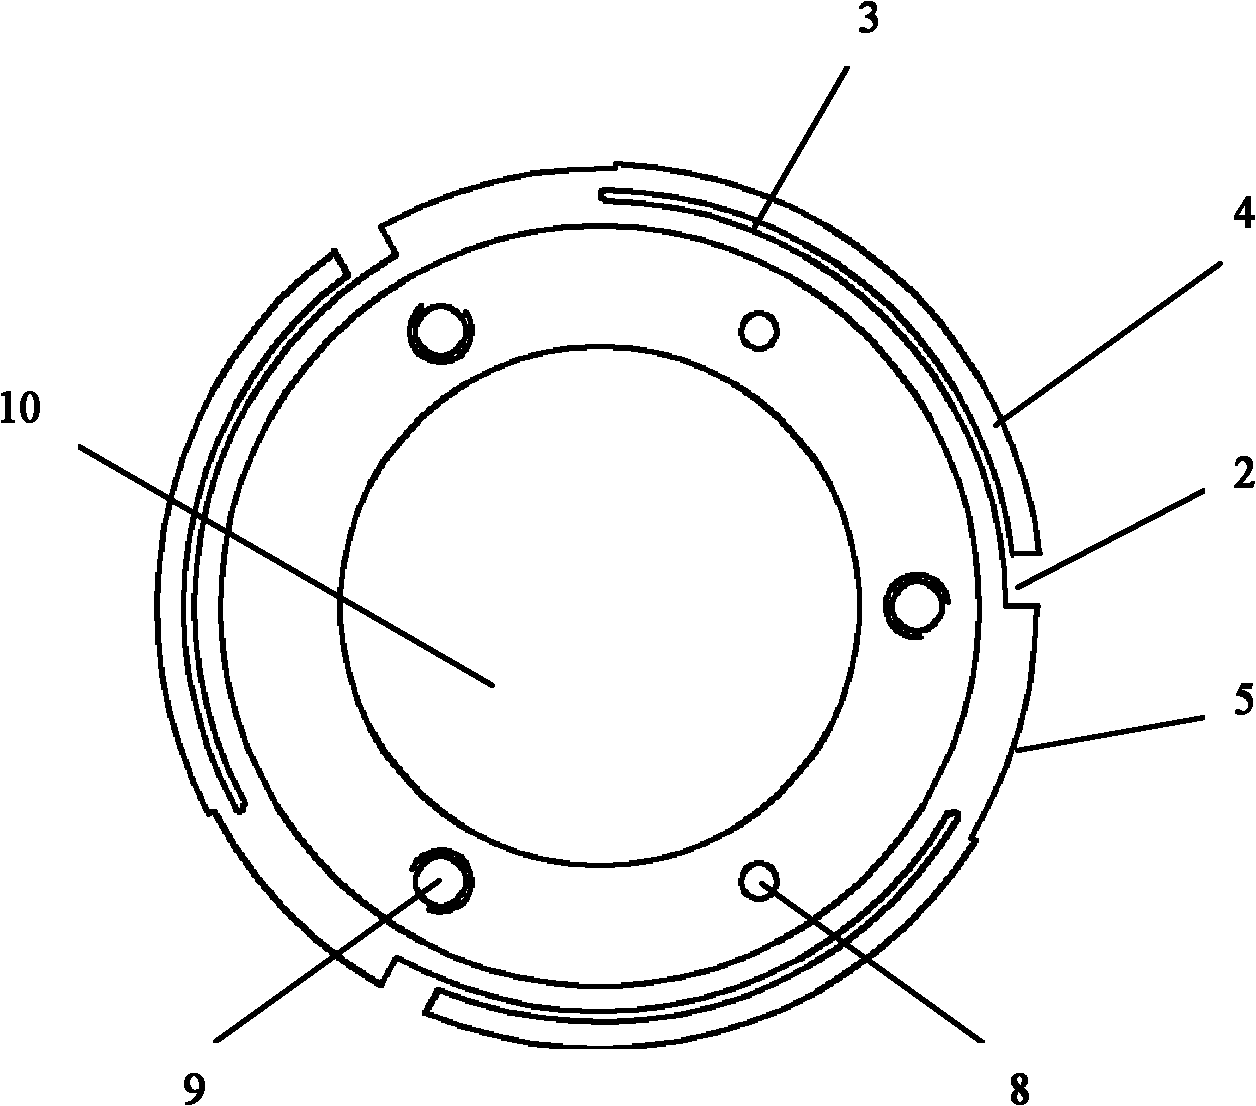 Single-point supporting flexible section for small-aperture reflecting mirror of space optical remote sensor